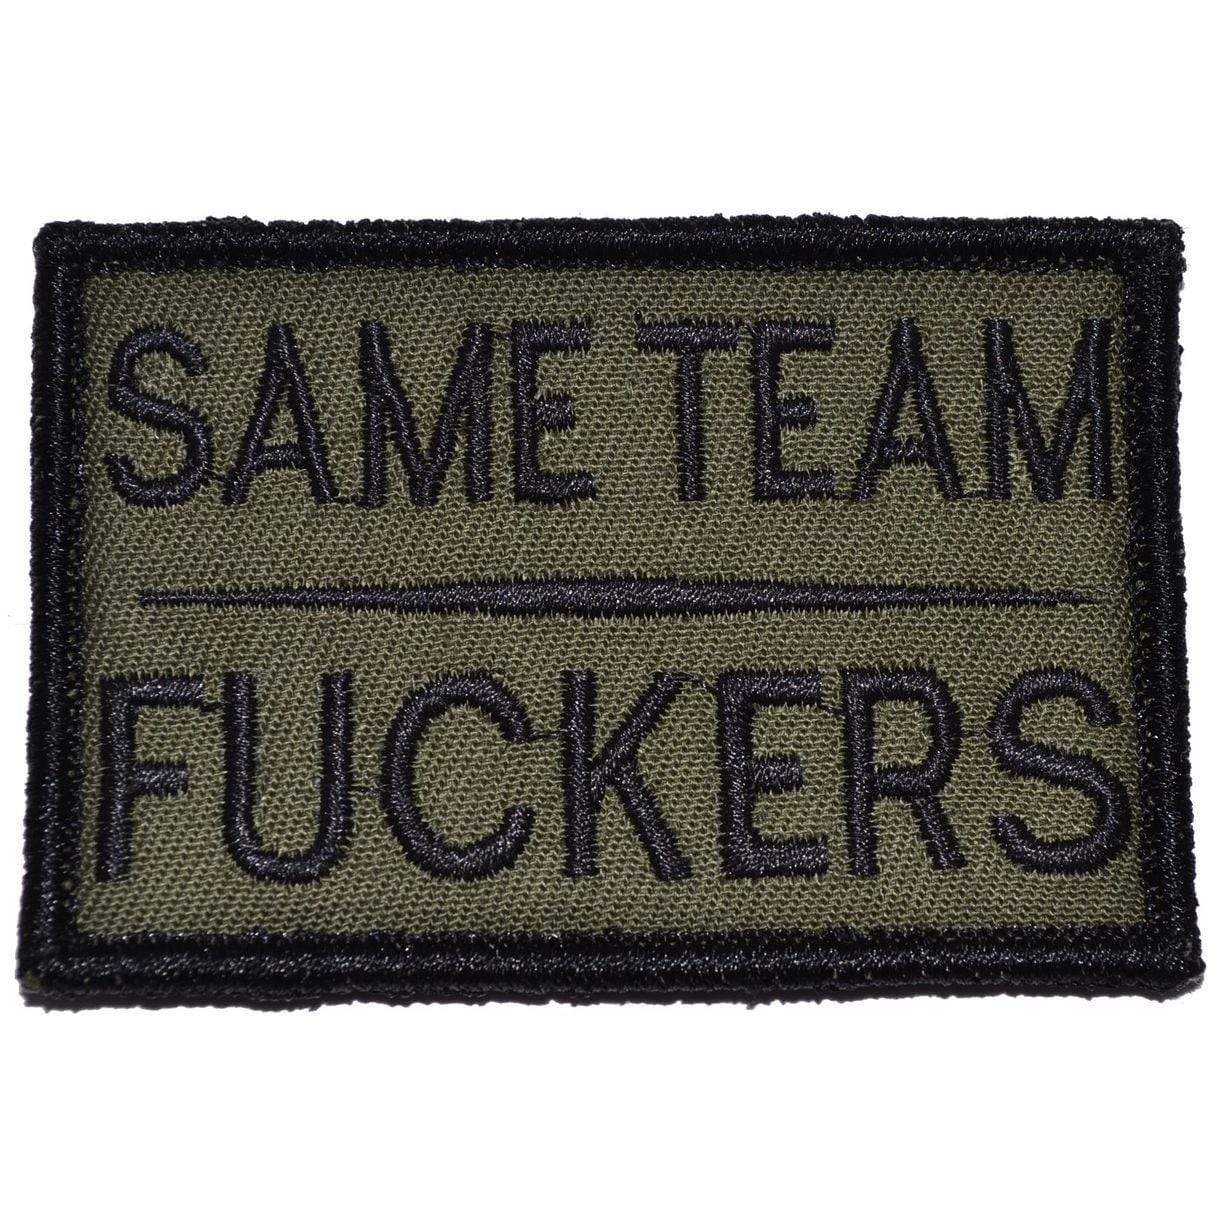 Tactical Gear Junkie Patches Olive Drab Same Team Fuckers - 2x3 Patch